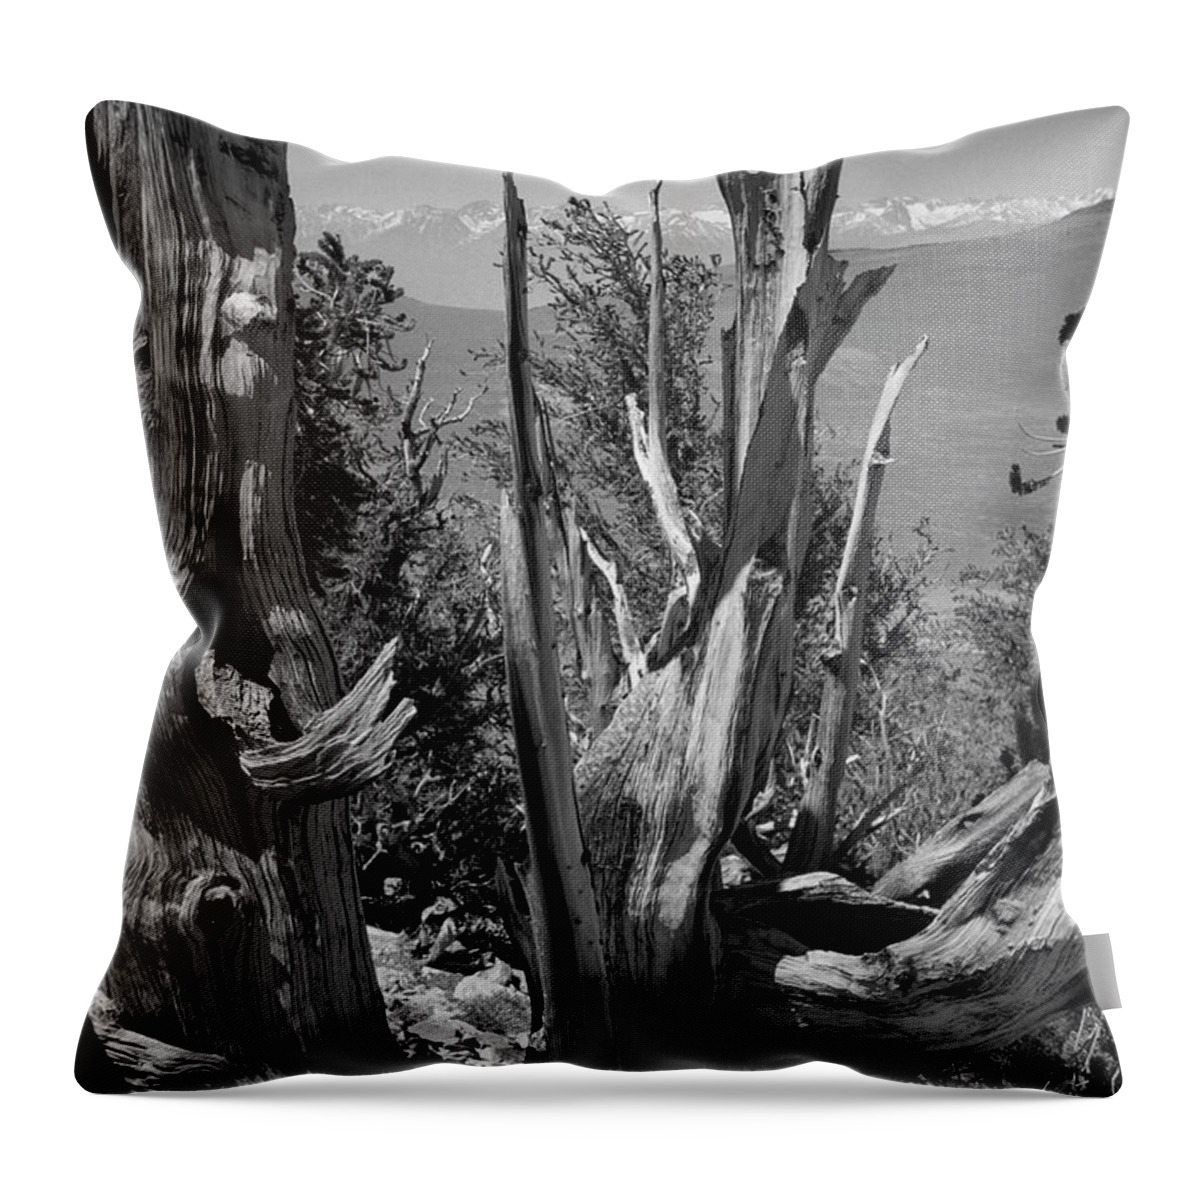 Bristlecone Pine Throw Pillow featuring the photograph Ancient Bristlecone Pine Tree, Composition 8, Inyo National Forest, White Mountains, California by Kathy Anselmo